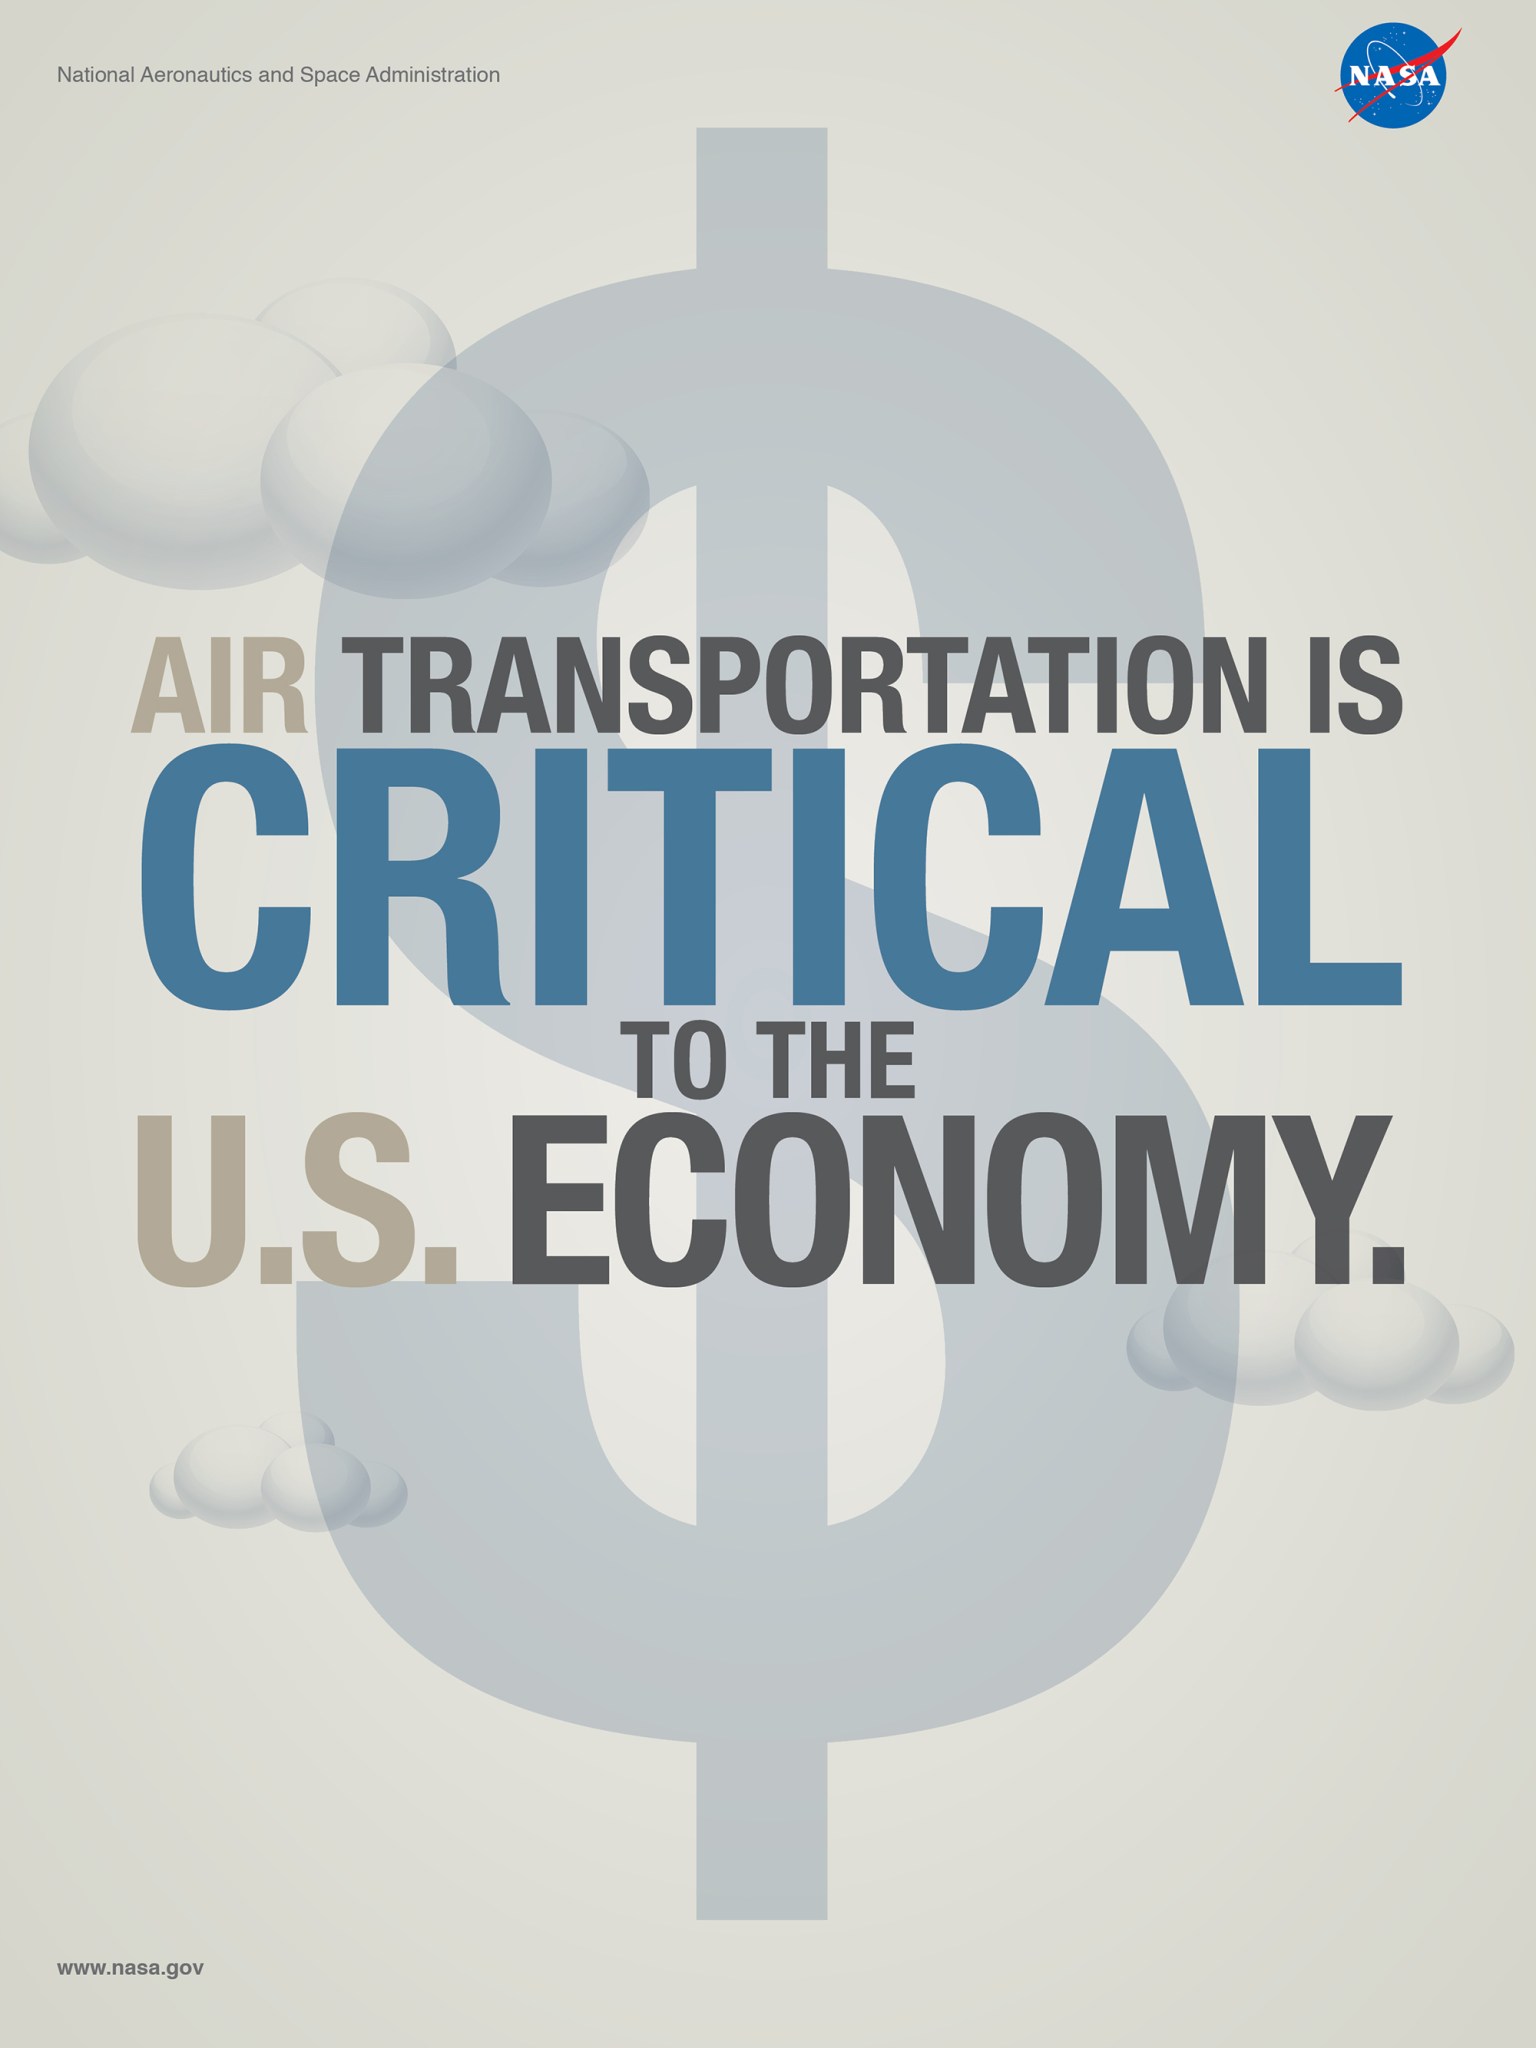 Air transportation is critical to the U.S. economy.